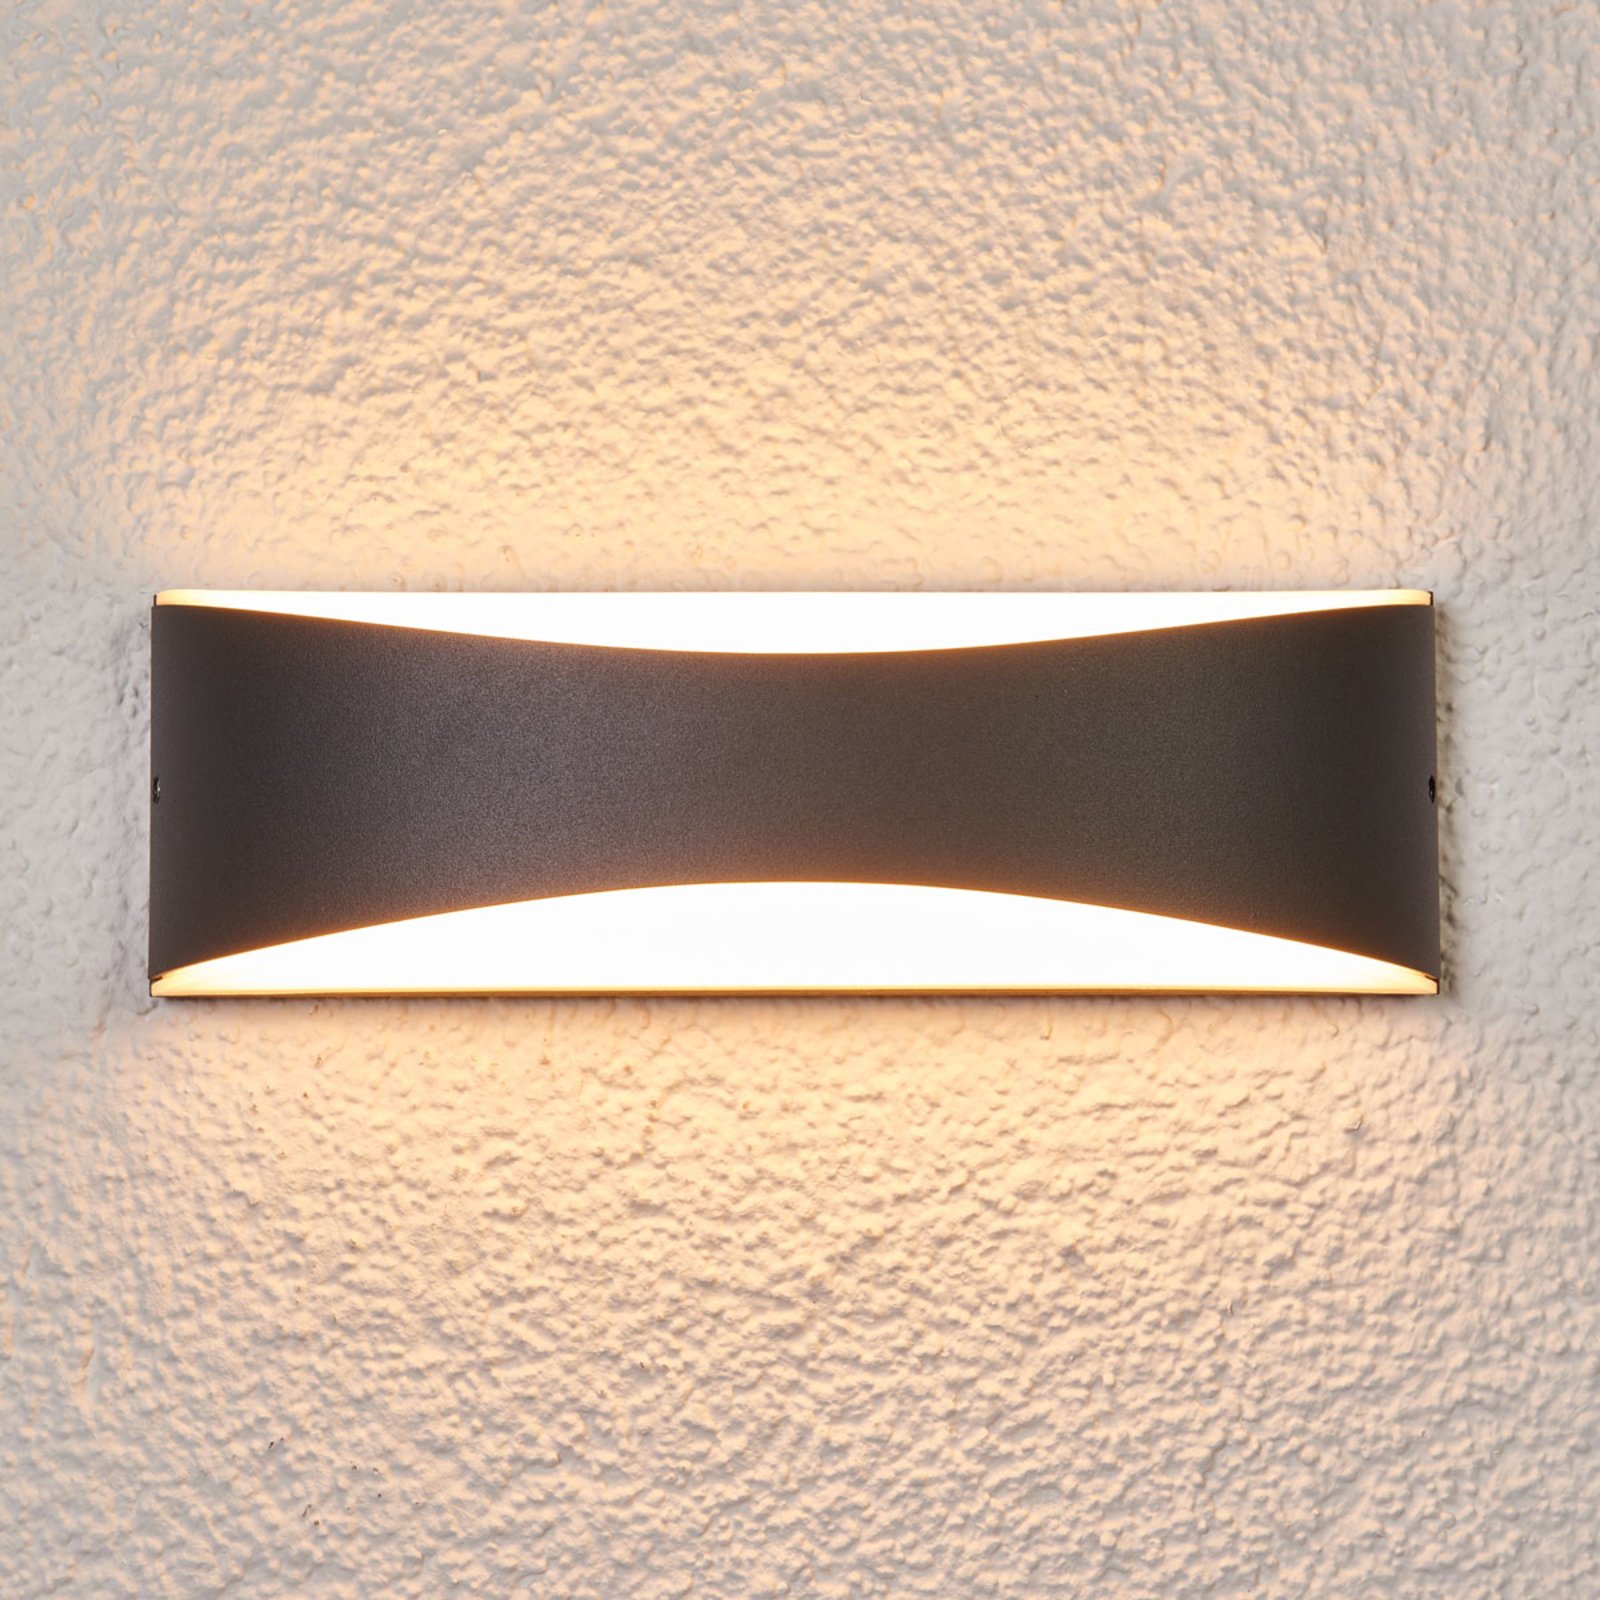 Anthracite-coloured LED outdoor wall light Akira